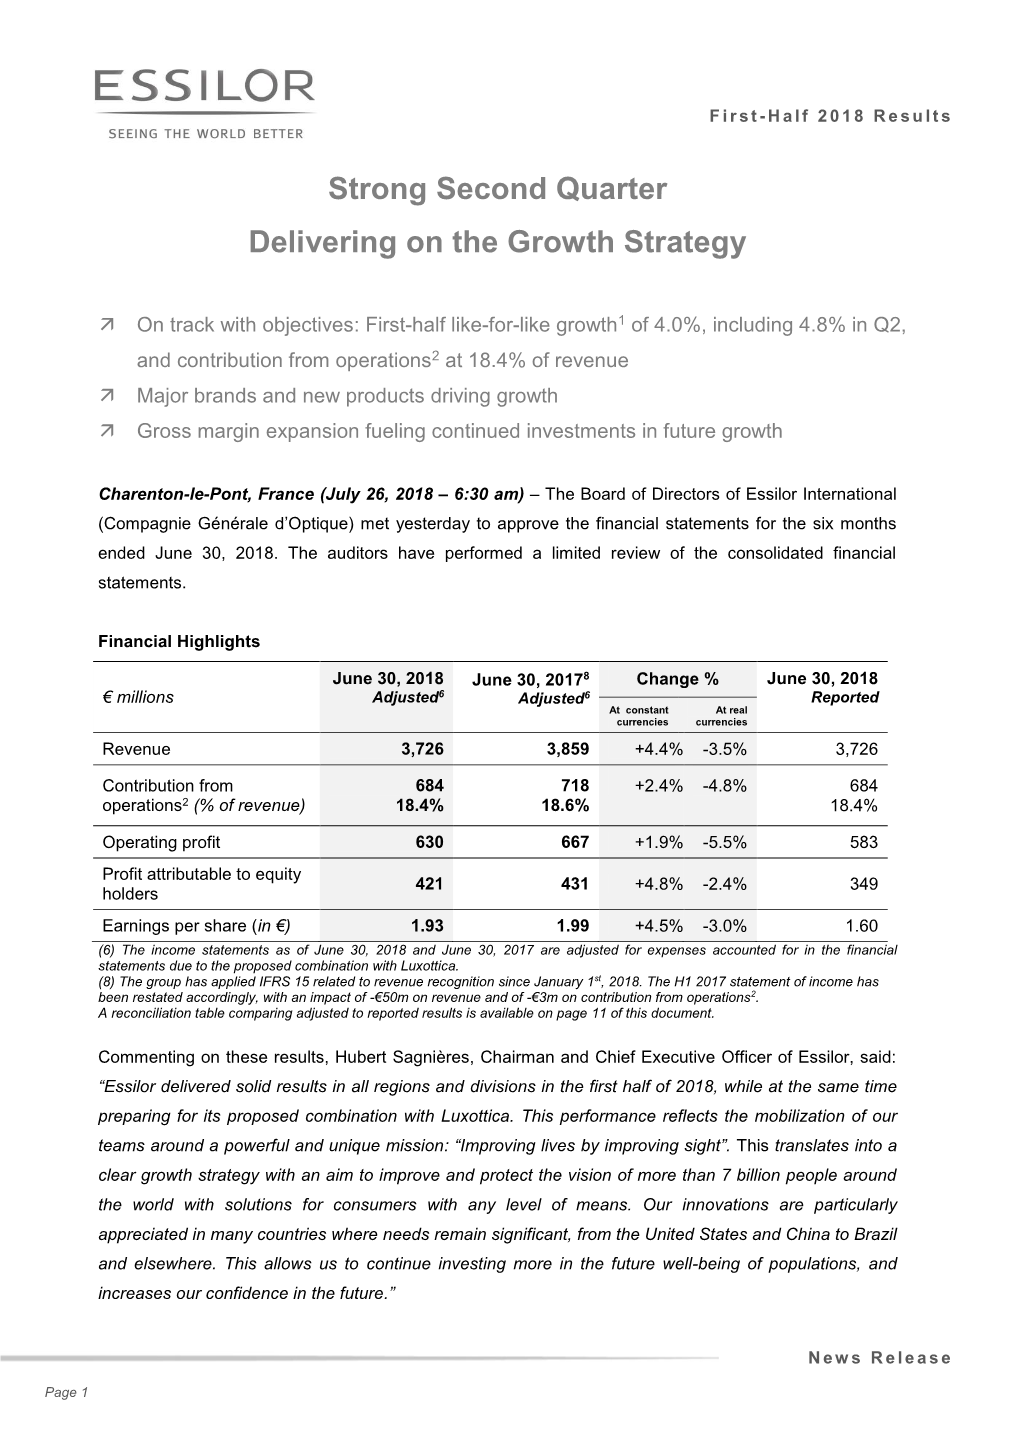 Strong Second Quarter Delivering on the Growth Strategy